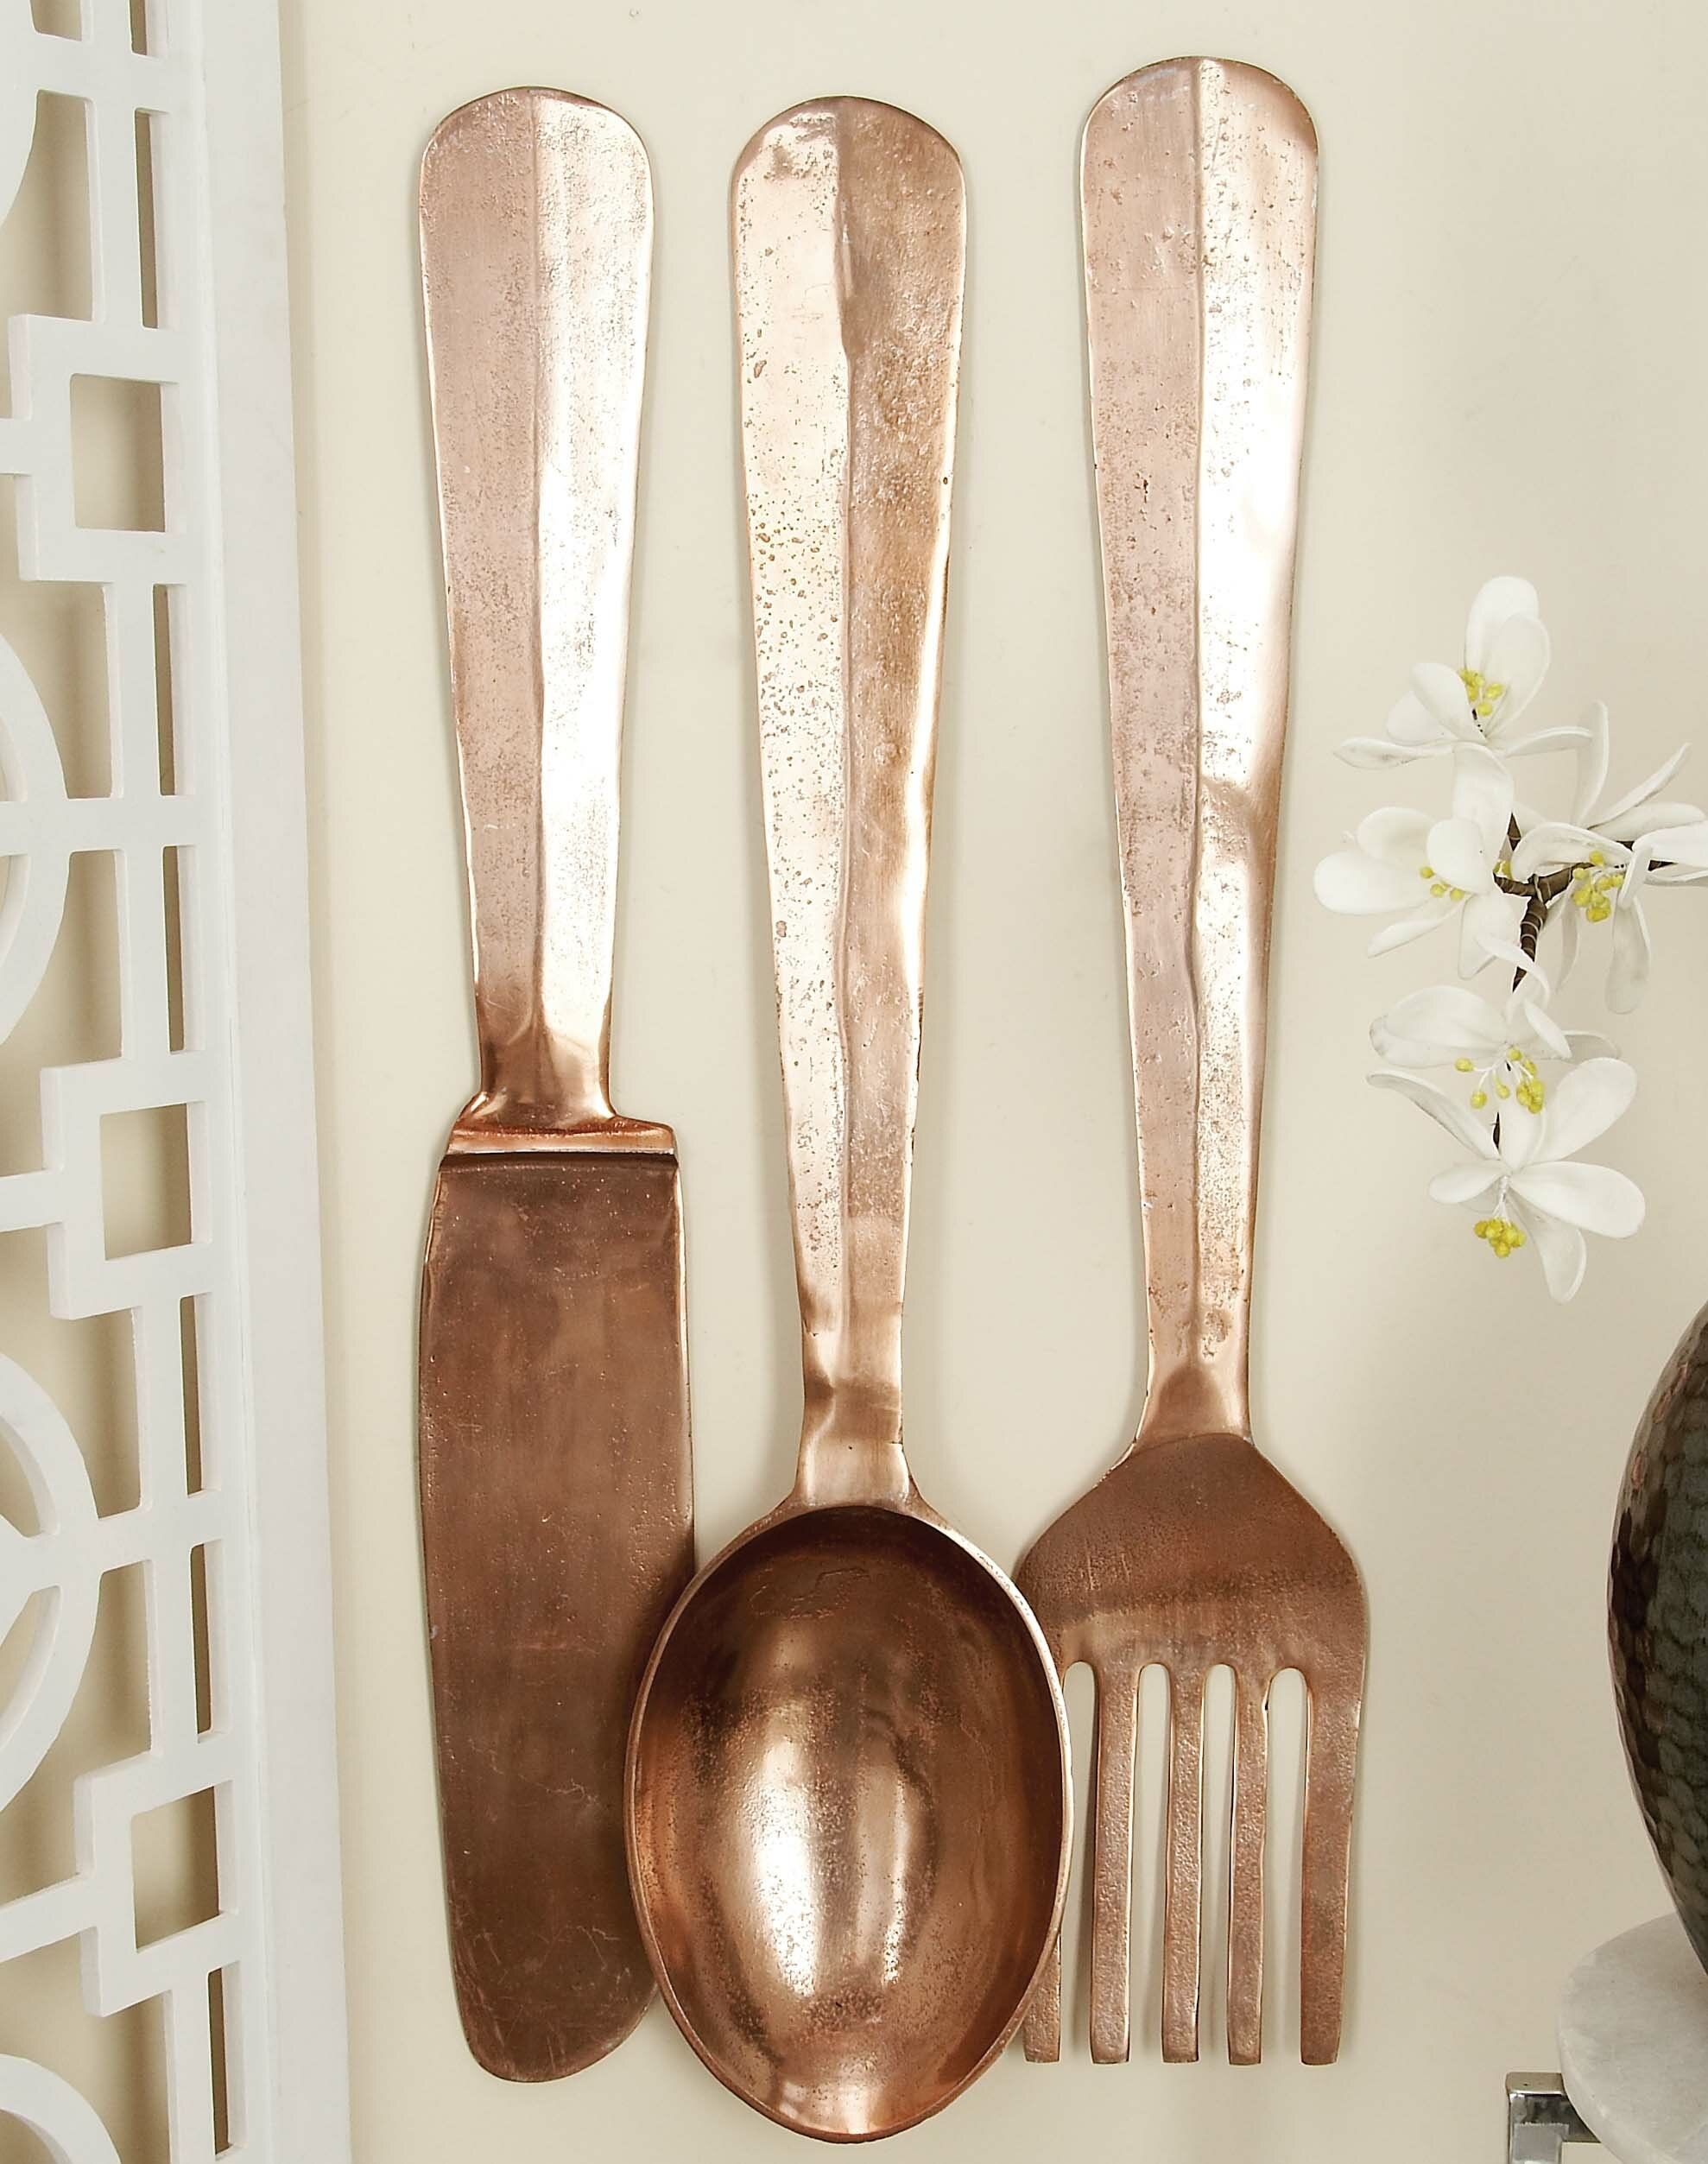 A copper fork, spoon, and knife with textured handles hanging on a wall